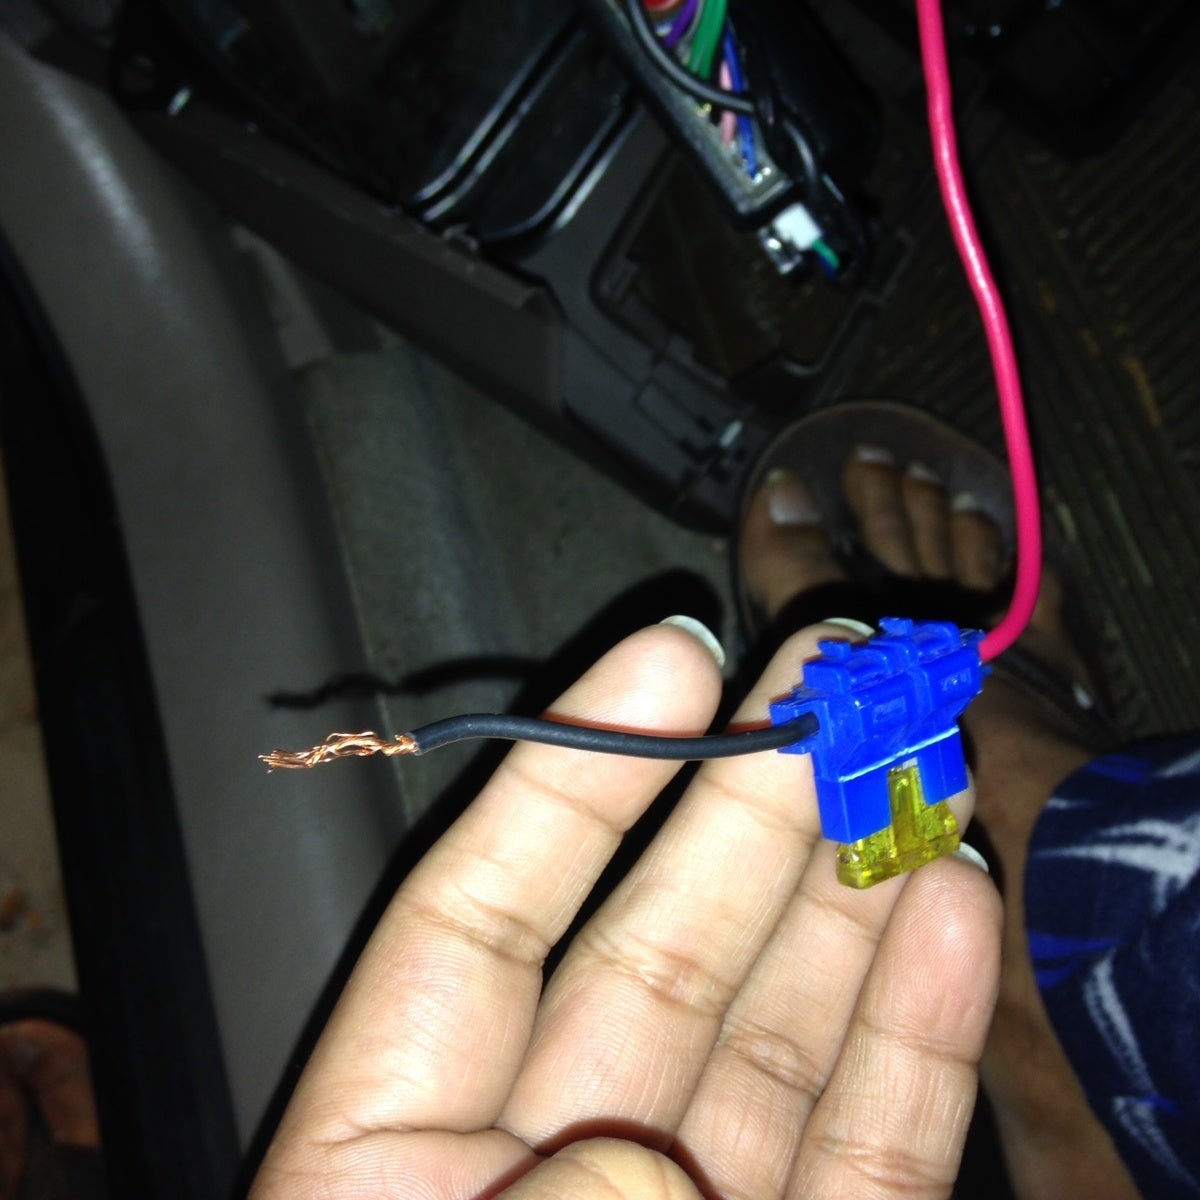 1998 Toyota Camry Wiring Harness from static.cargurus.com